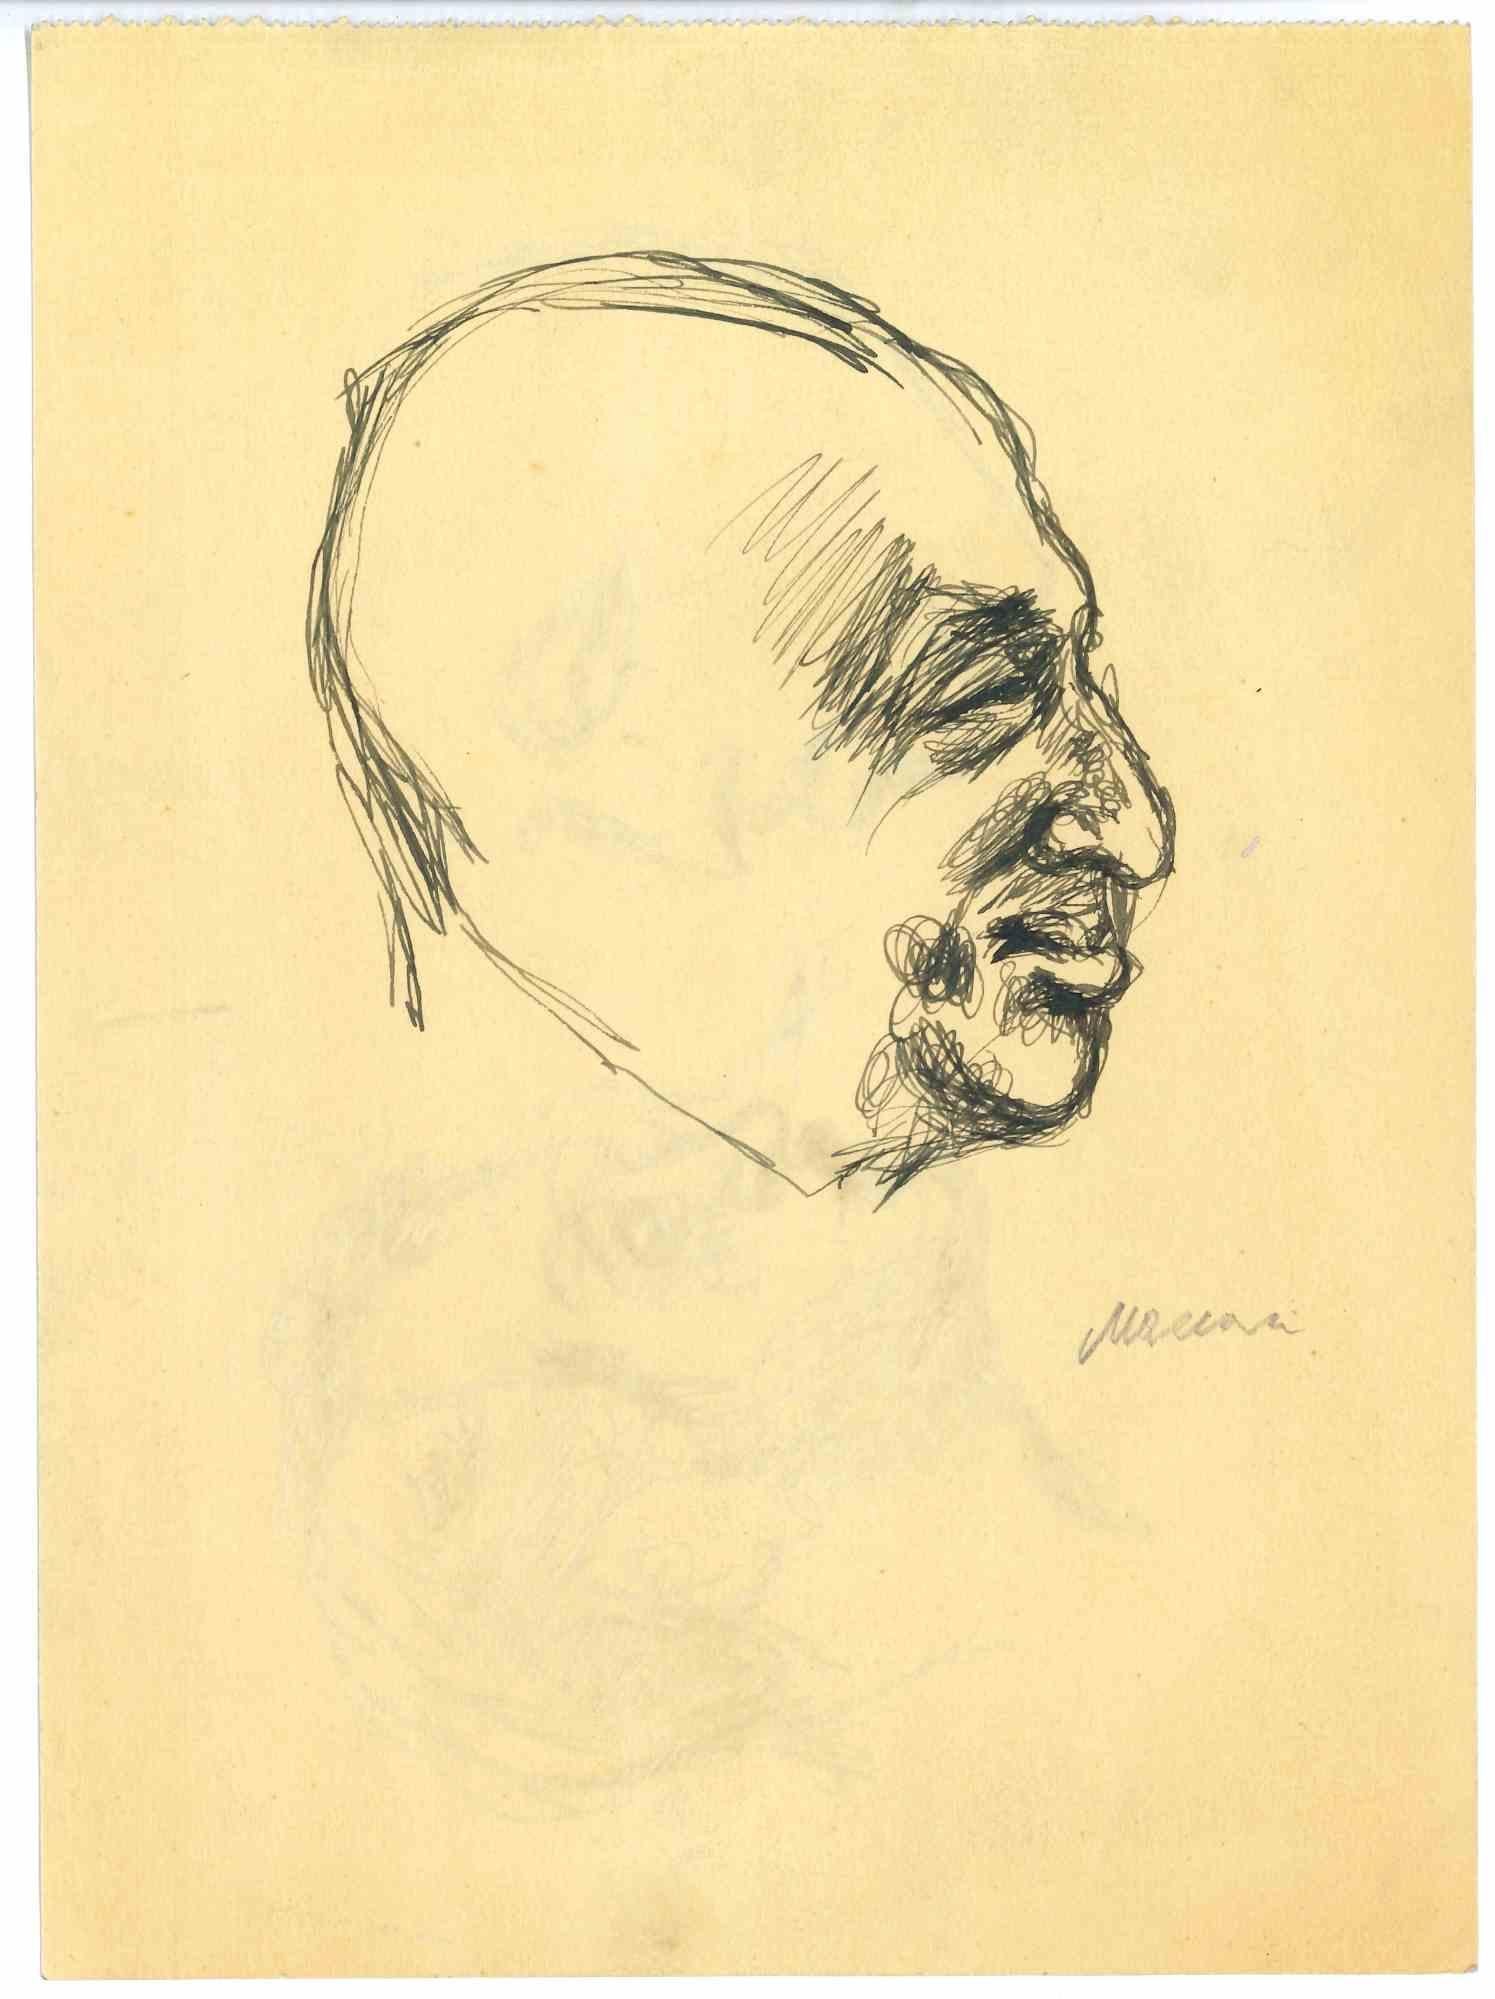 The Profile is an original Drawing in pen on creamy colored paper realized by Mino Maccari in mid 20th century.

Hand-signed on the lower in pencil.

With another drawing on the rear.

Good conditions.

Mino Maccari (1898-1989) was an Italian